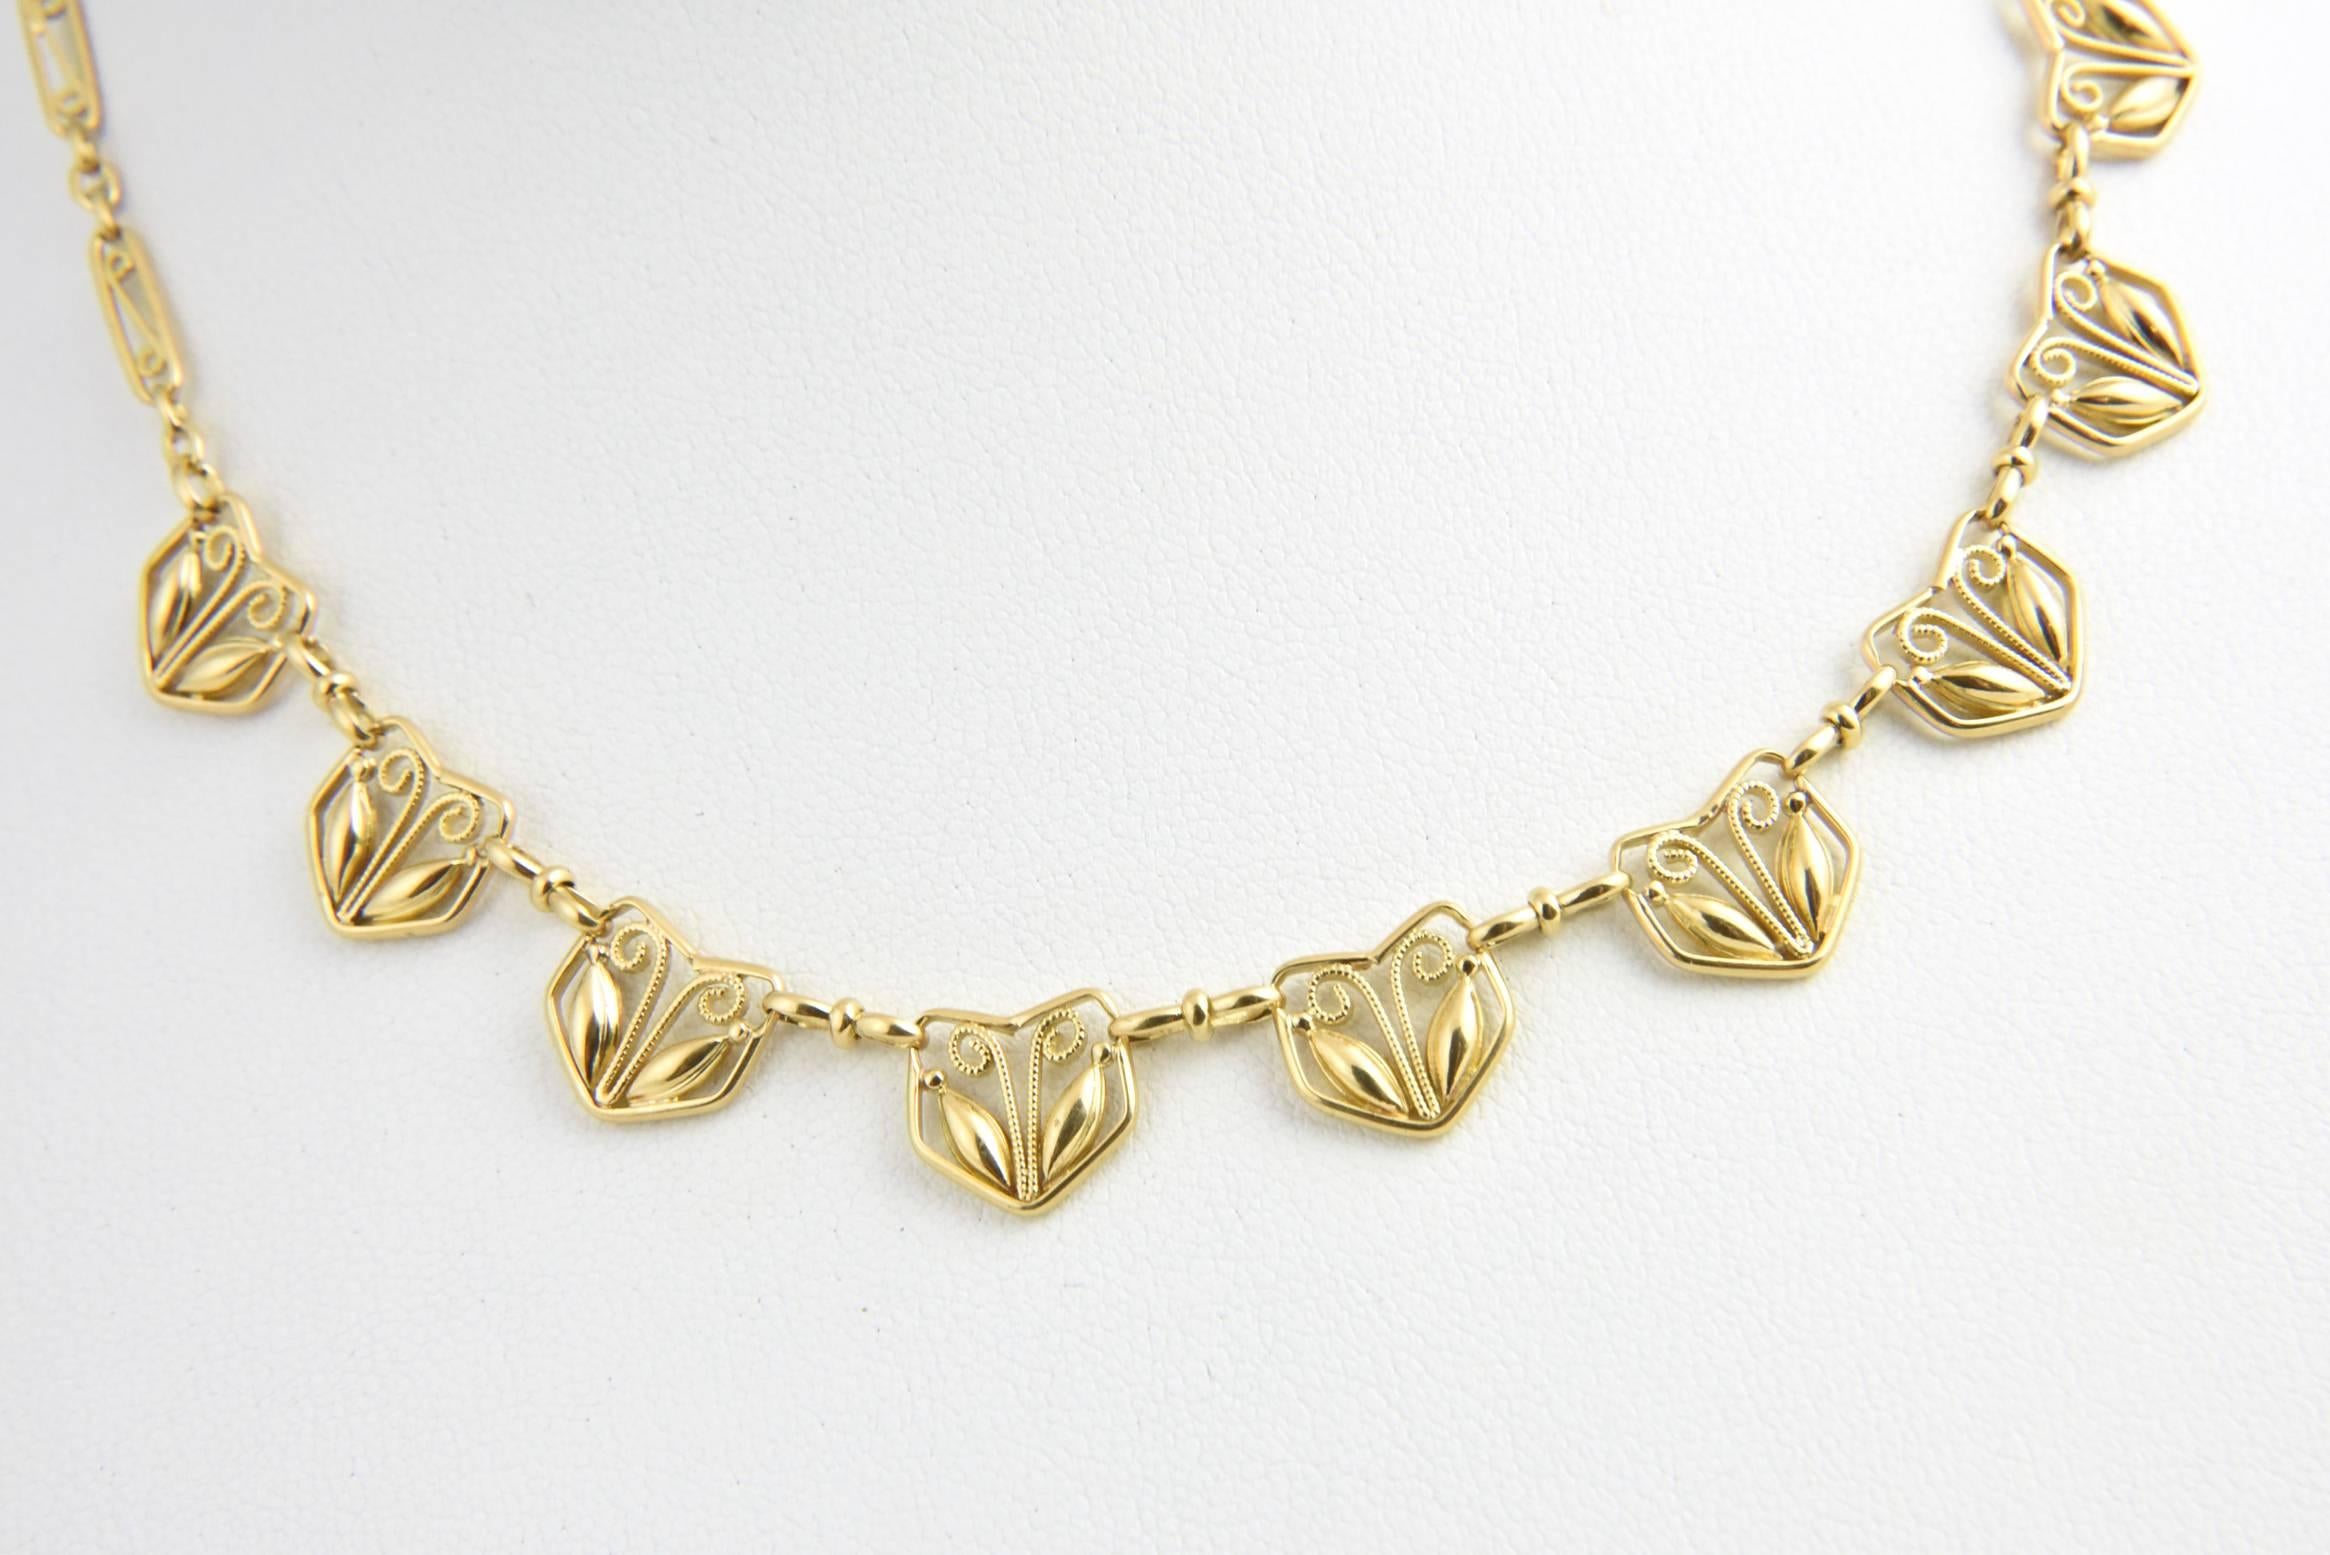 Women's Arts & Crafts French Gold Heart Necklace